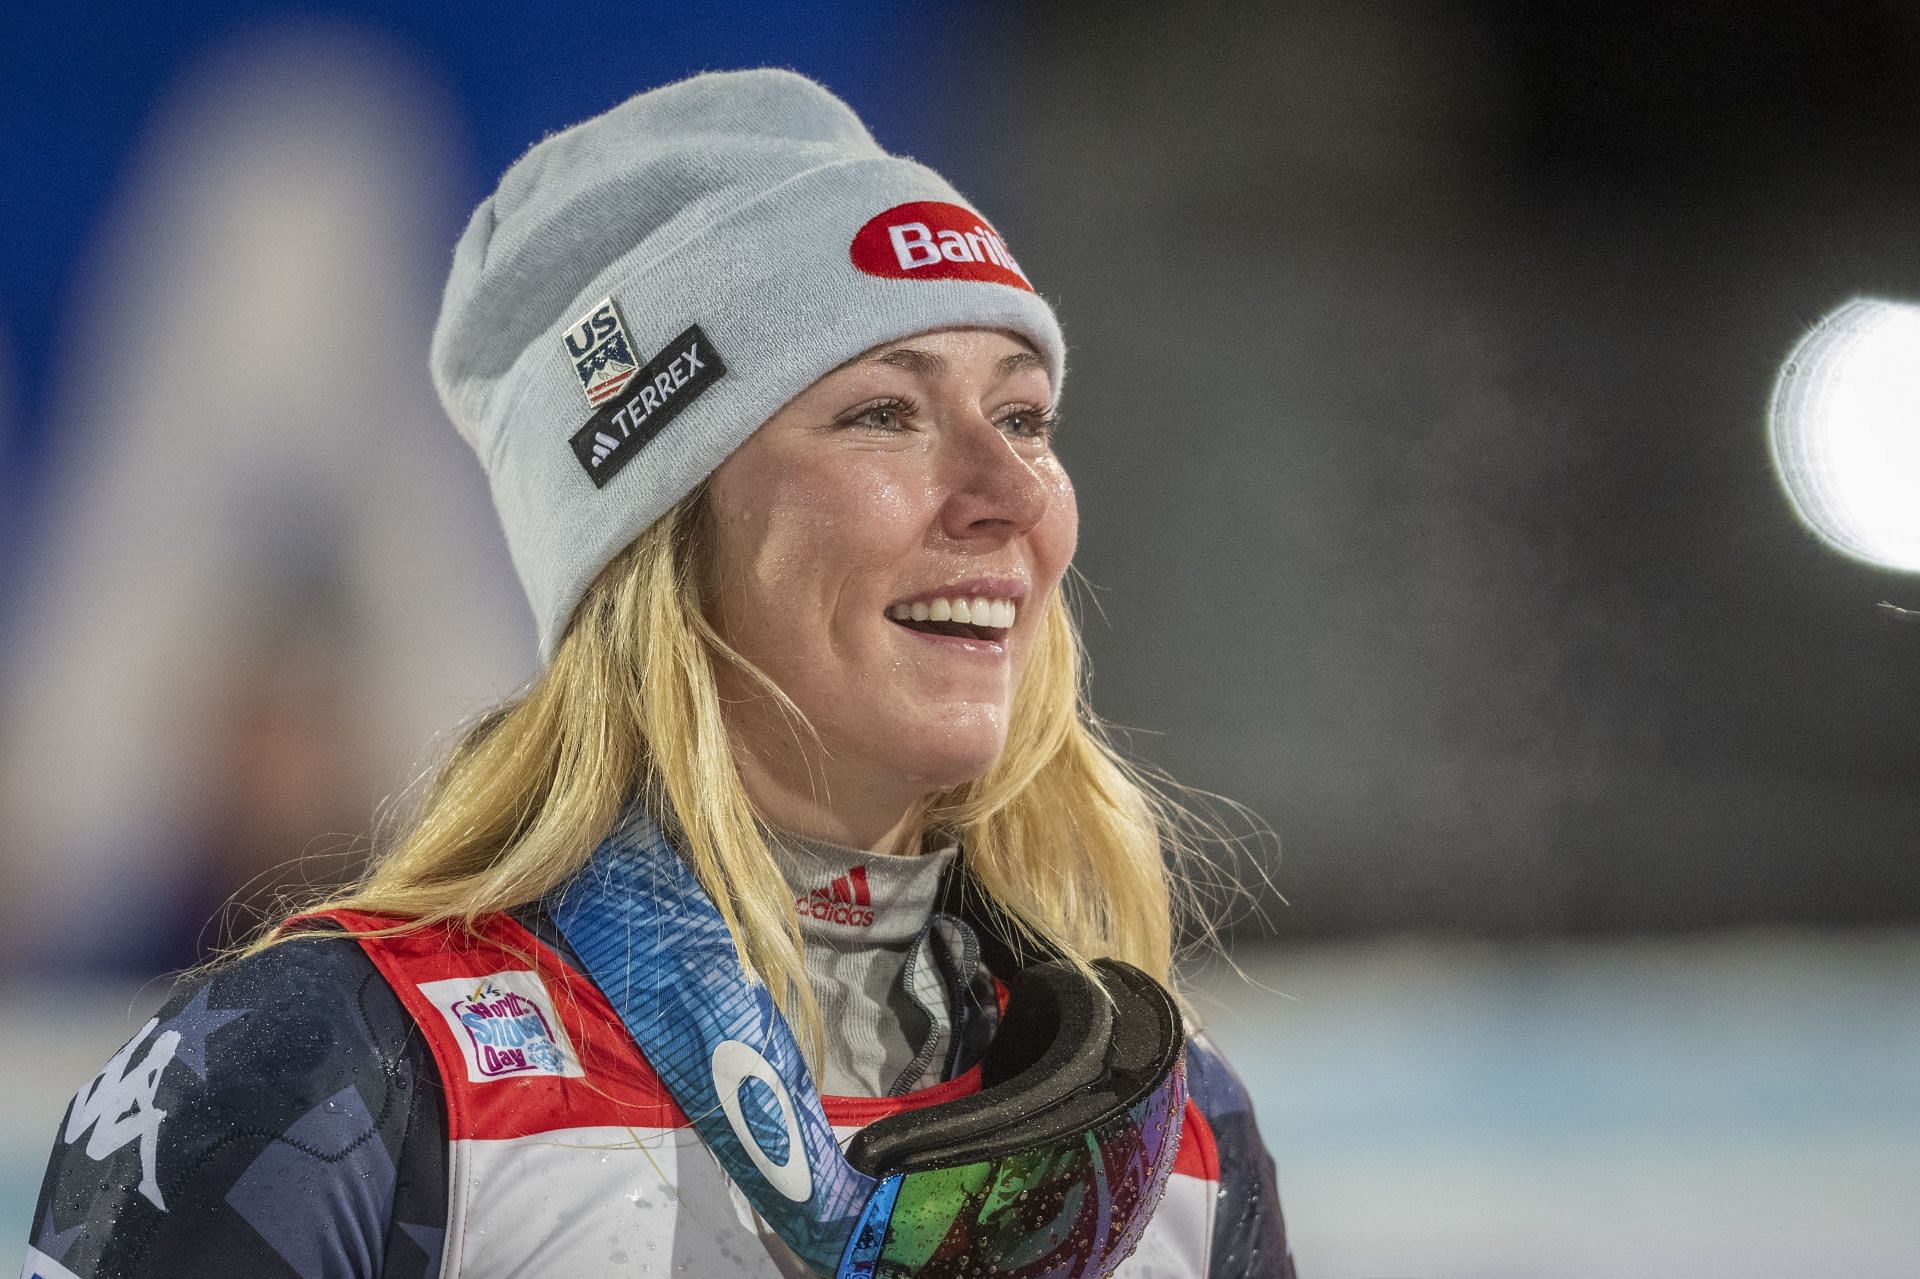 An ill Mikaela Shiffrin puts her wins record on hold as she finishes ...